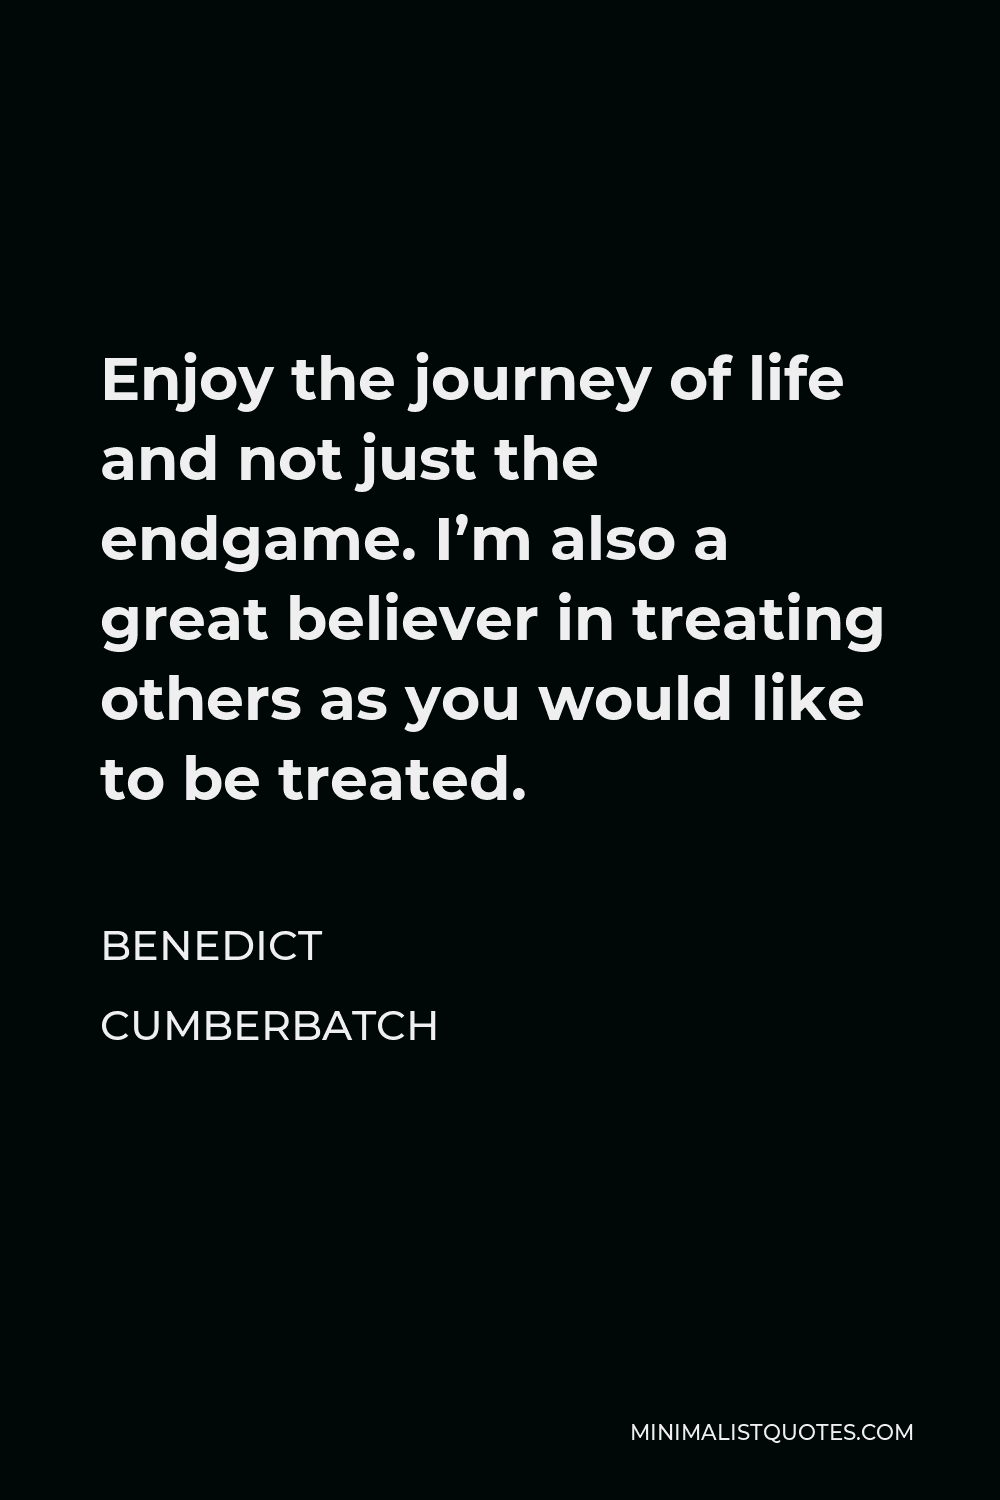 Benedict Cumberbatch Quote - Enjoy the journey of life and not just the endgame. I’m also a great believer in treating others as you would like to be treated.